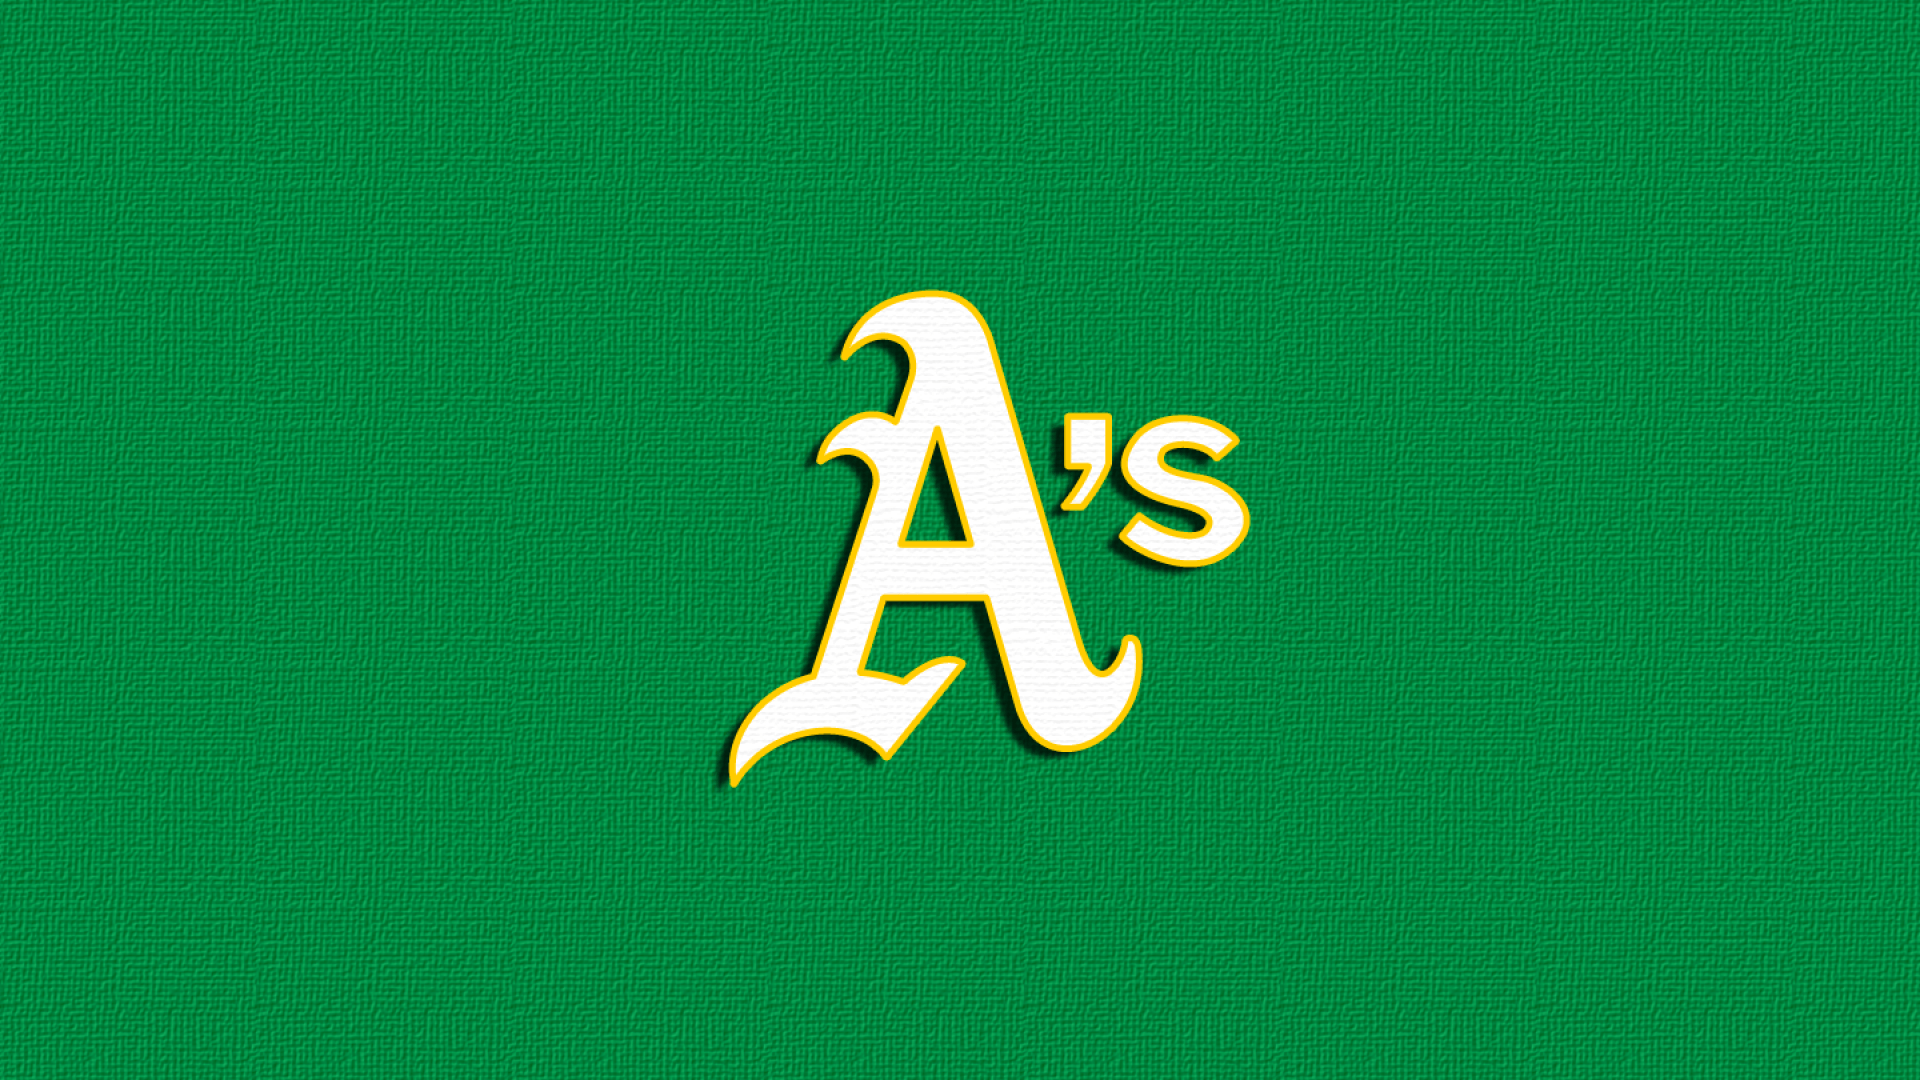 Oakland Athletics Browser Themes, Wallpaper and More